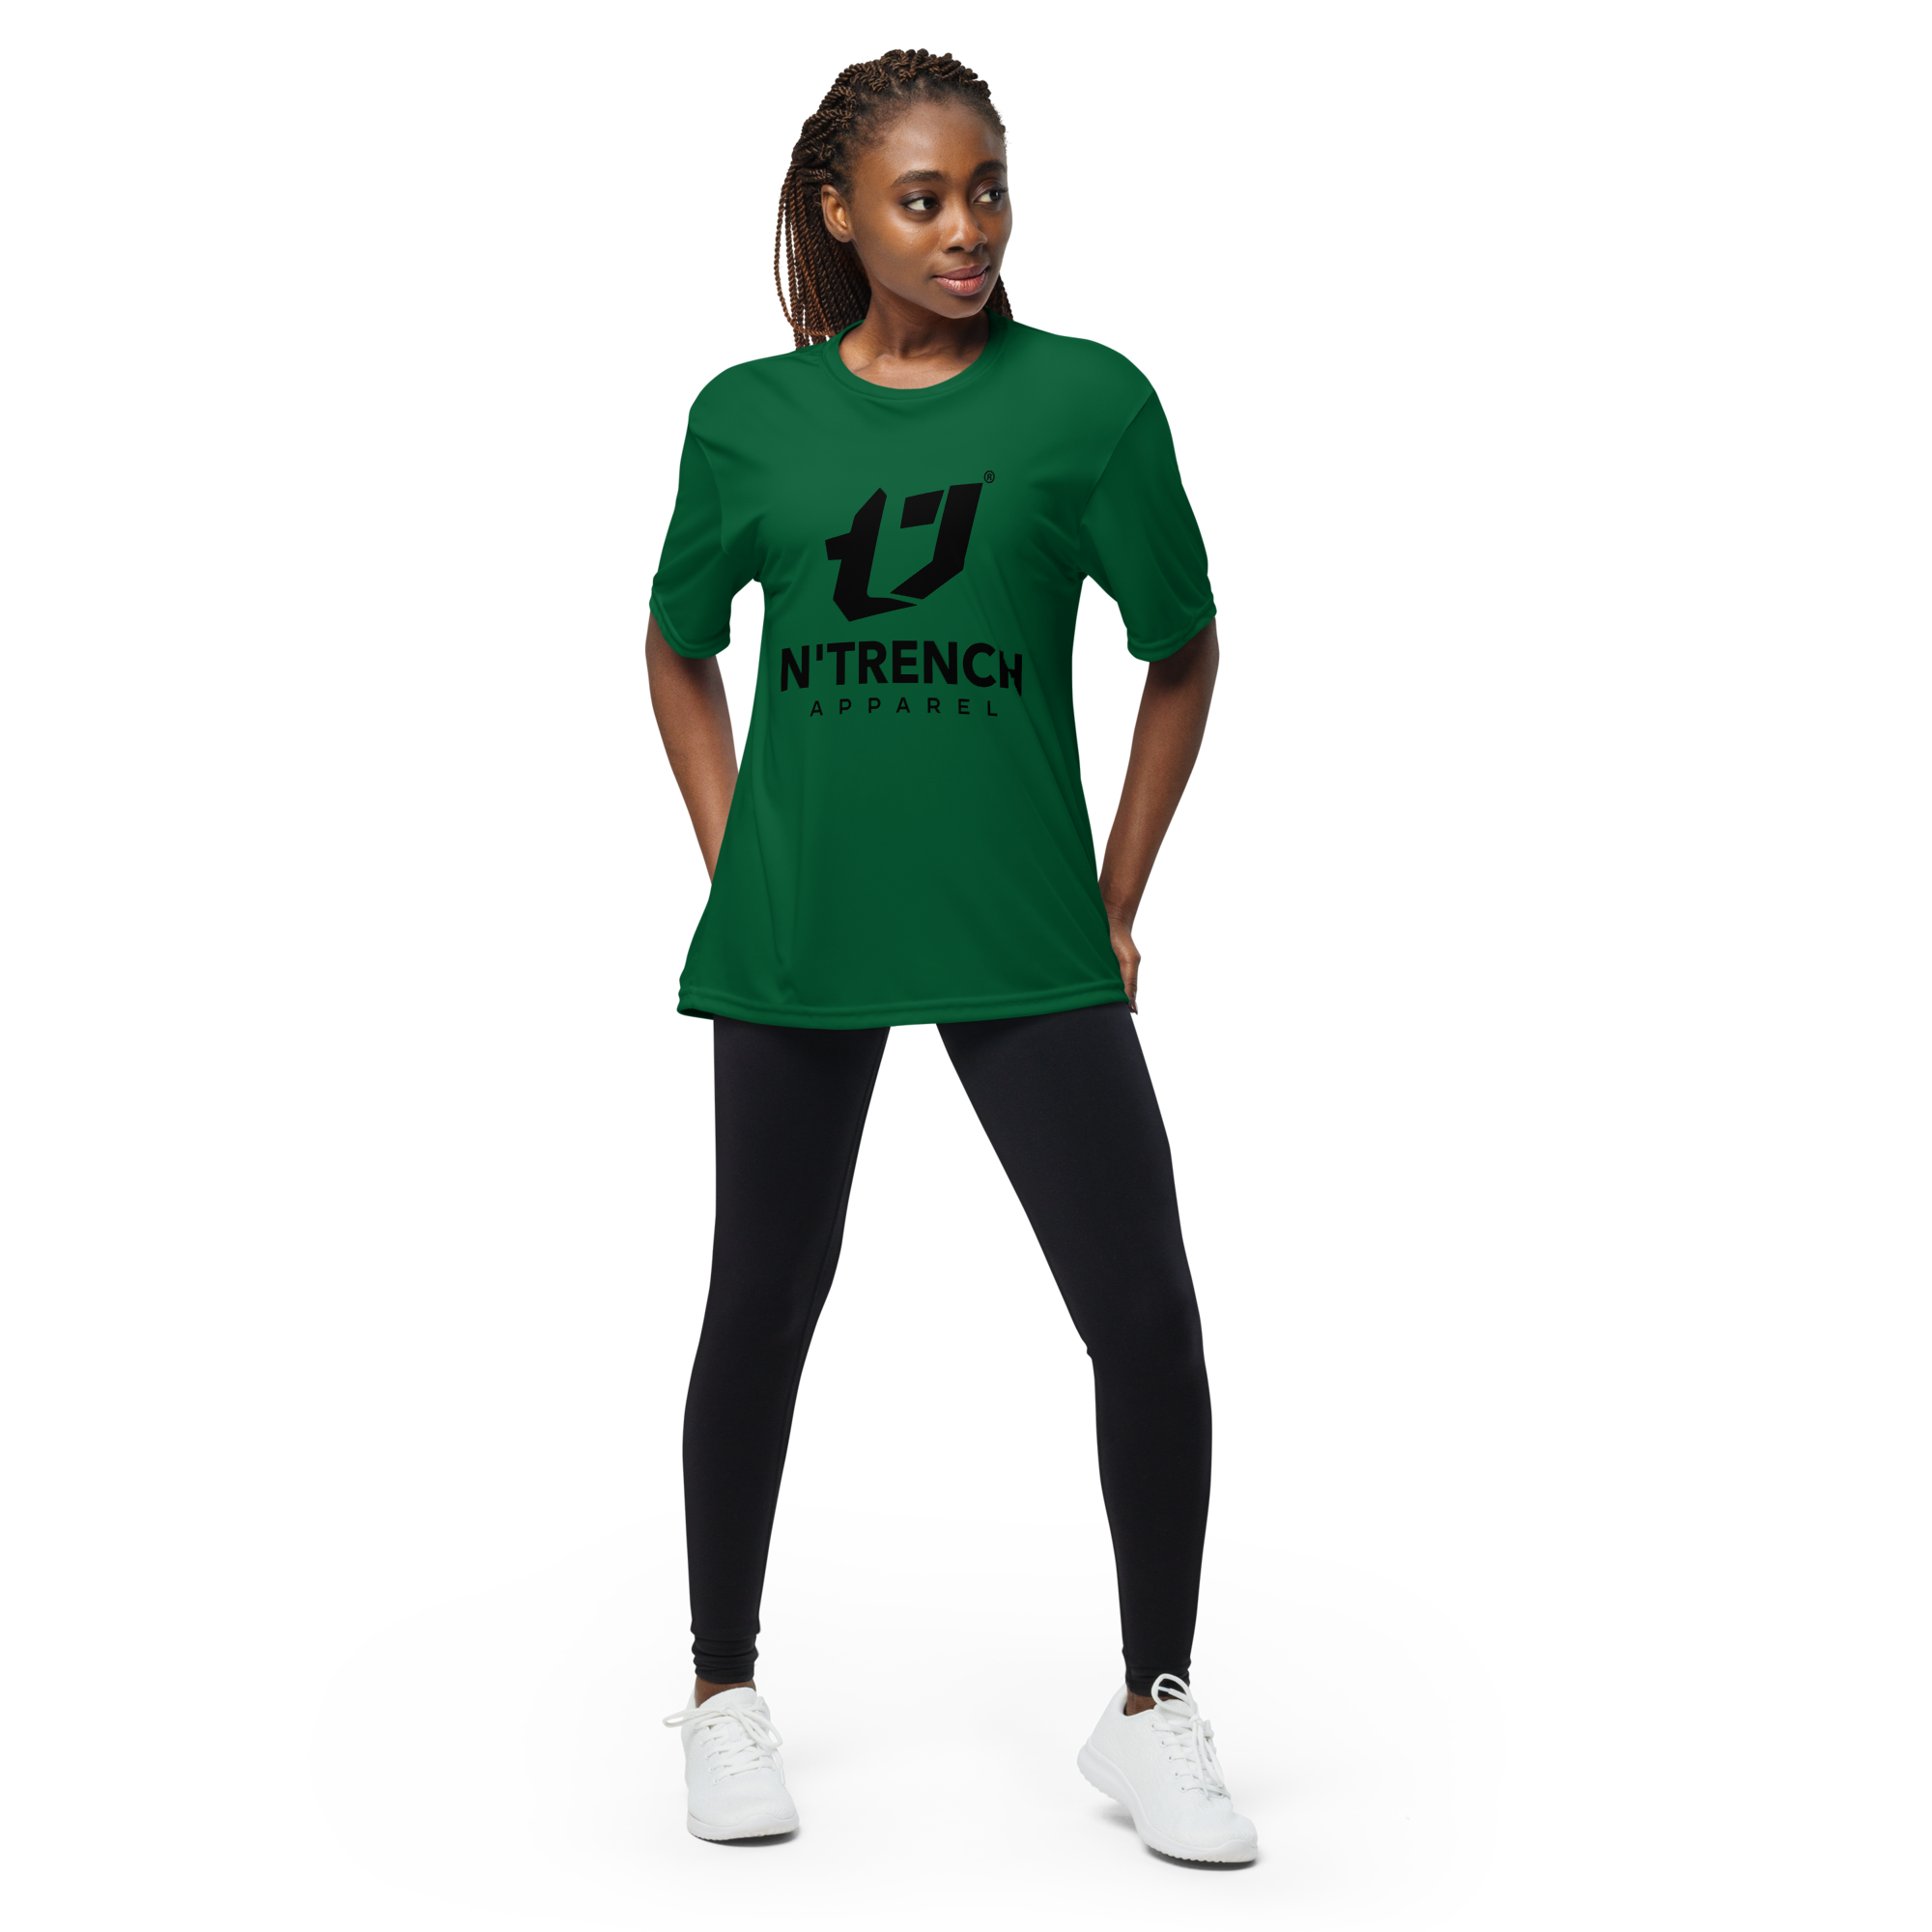 N'Trench Apparel Black Lettering unisex performance crew neck t-shirt 2